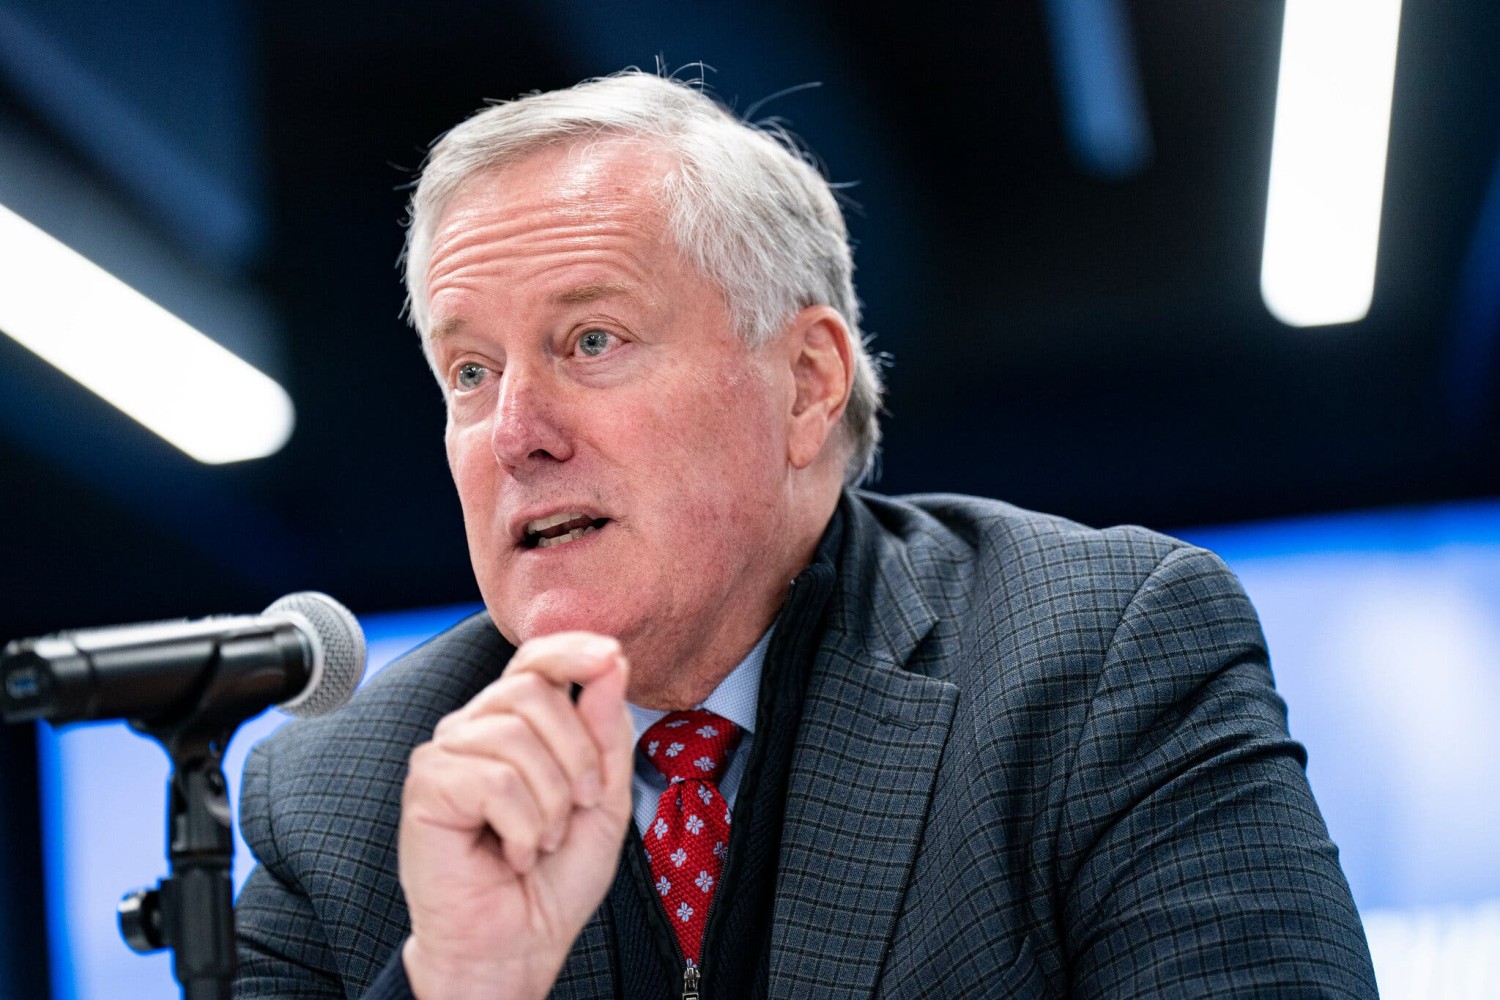 Mark Meadows, a former White House chief of staff, is one of 19 defendants in a racketeering case in Georgia over efforts to overturn the 2020 presidential election results.Credit...Al Drago for The New York Times